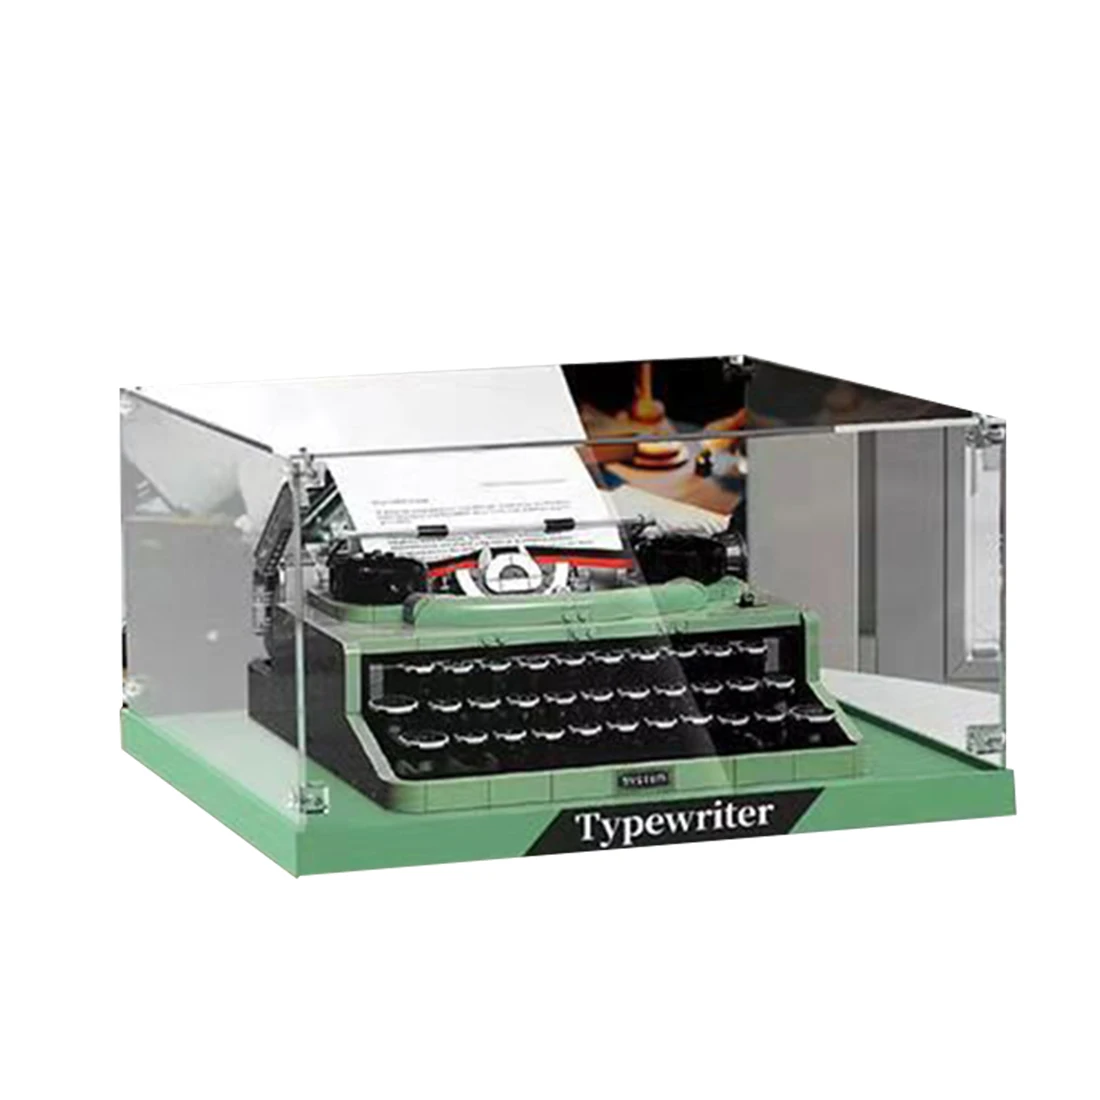 

Acrylic Display Case for Lego 21327 Typewriter Showcase Dustproof Clear Display Box (Blocks Set not Included）